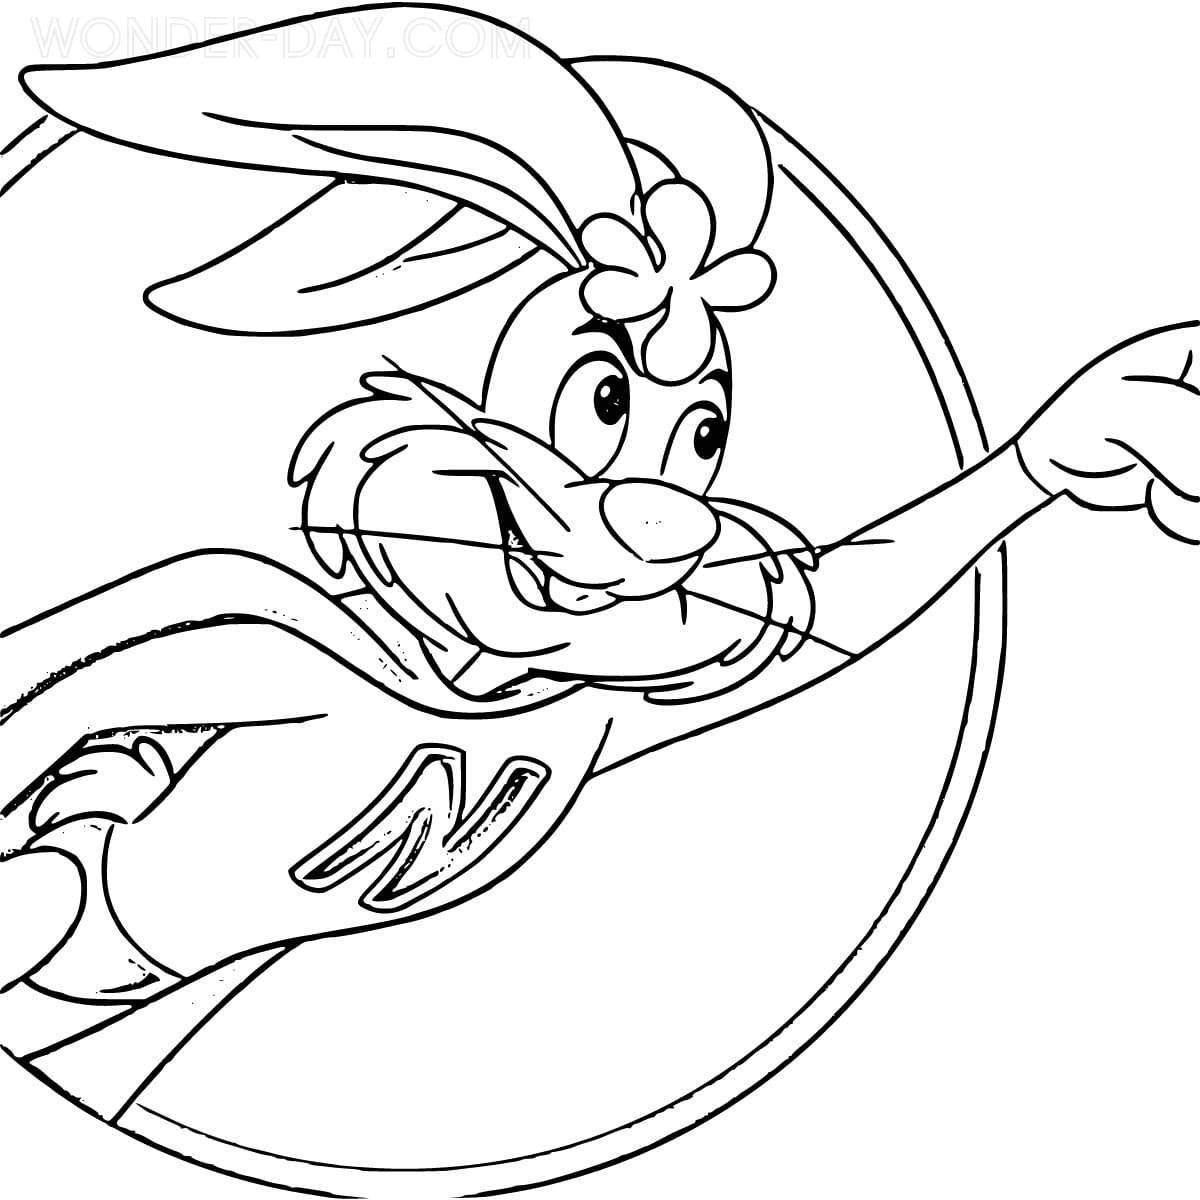 Coloring book glowing roger bunny